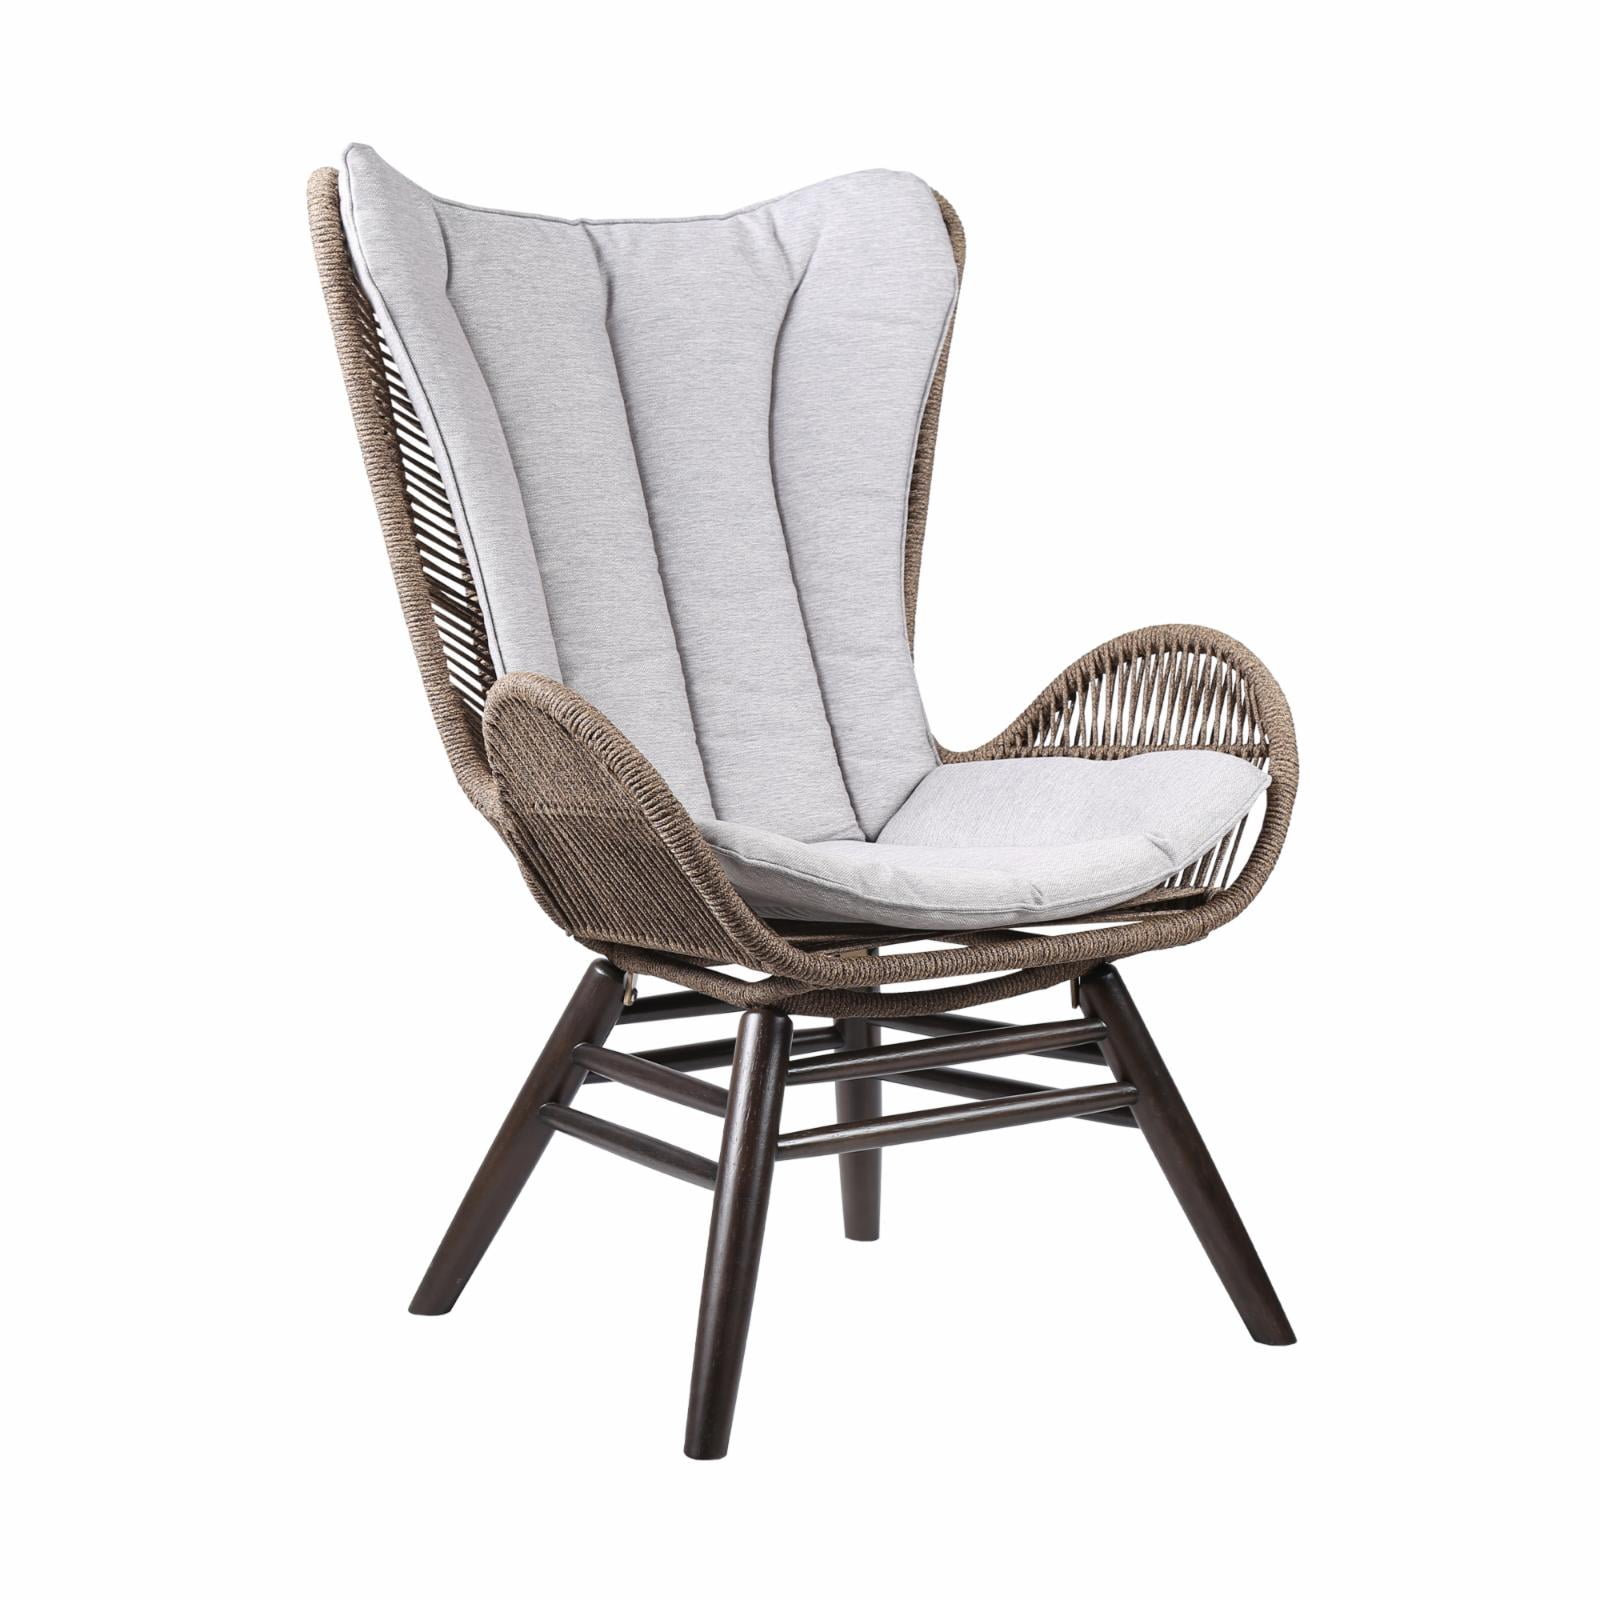 Picture of Armen Living LCKGCHTRU King Indoor Outdoor Lounge Chair in Dark Eucalyptus Wood with Truffle Rope & Grey Cushion